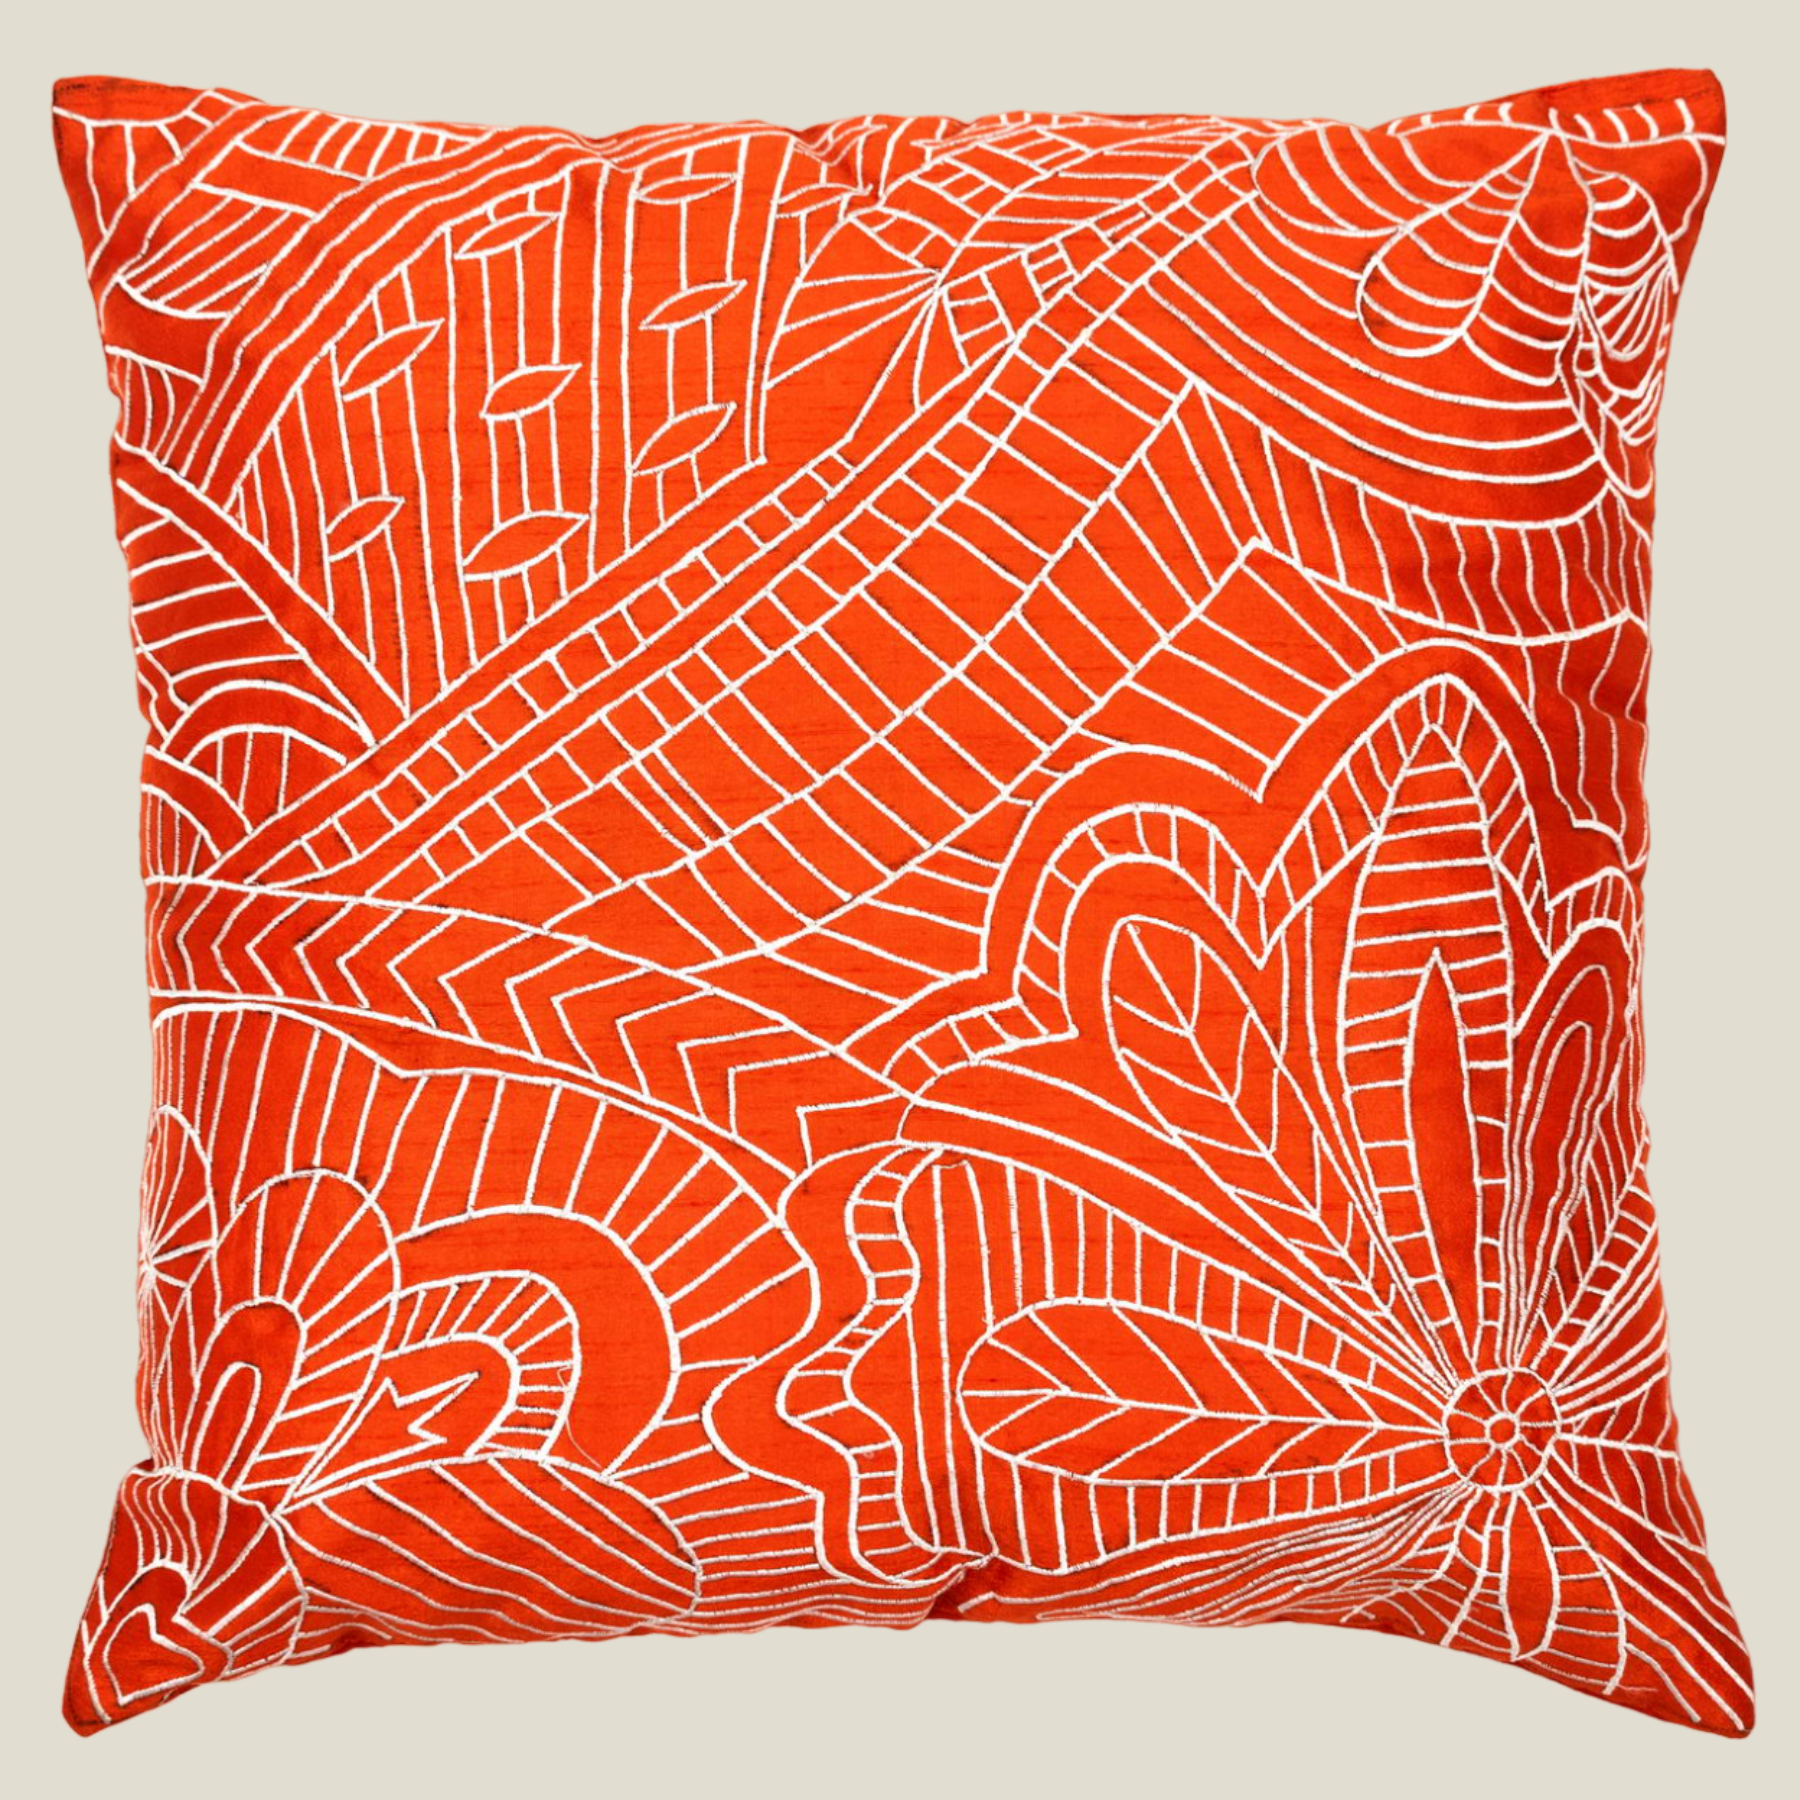 The Luxelife Orange Floral White Embroidered Cushion Cover